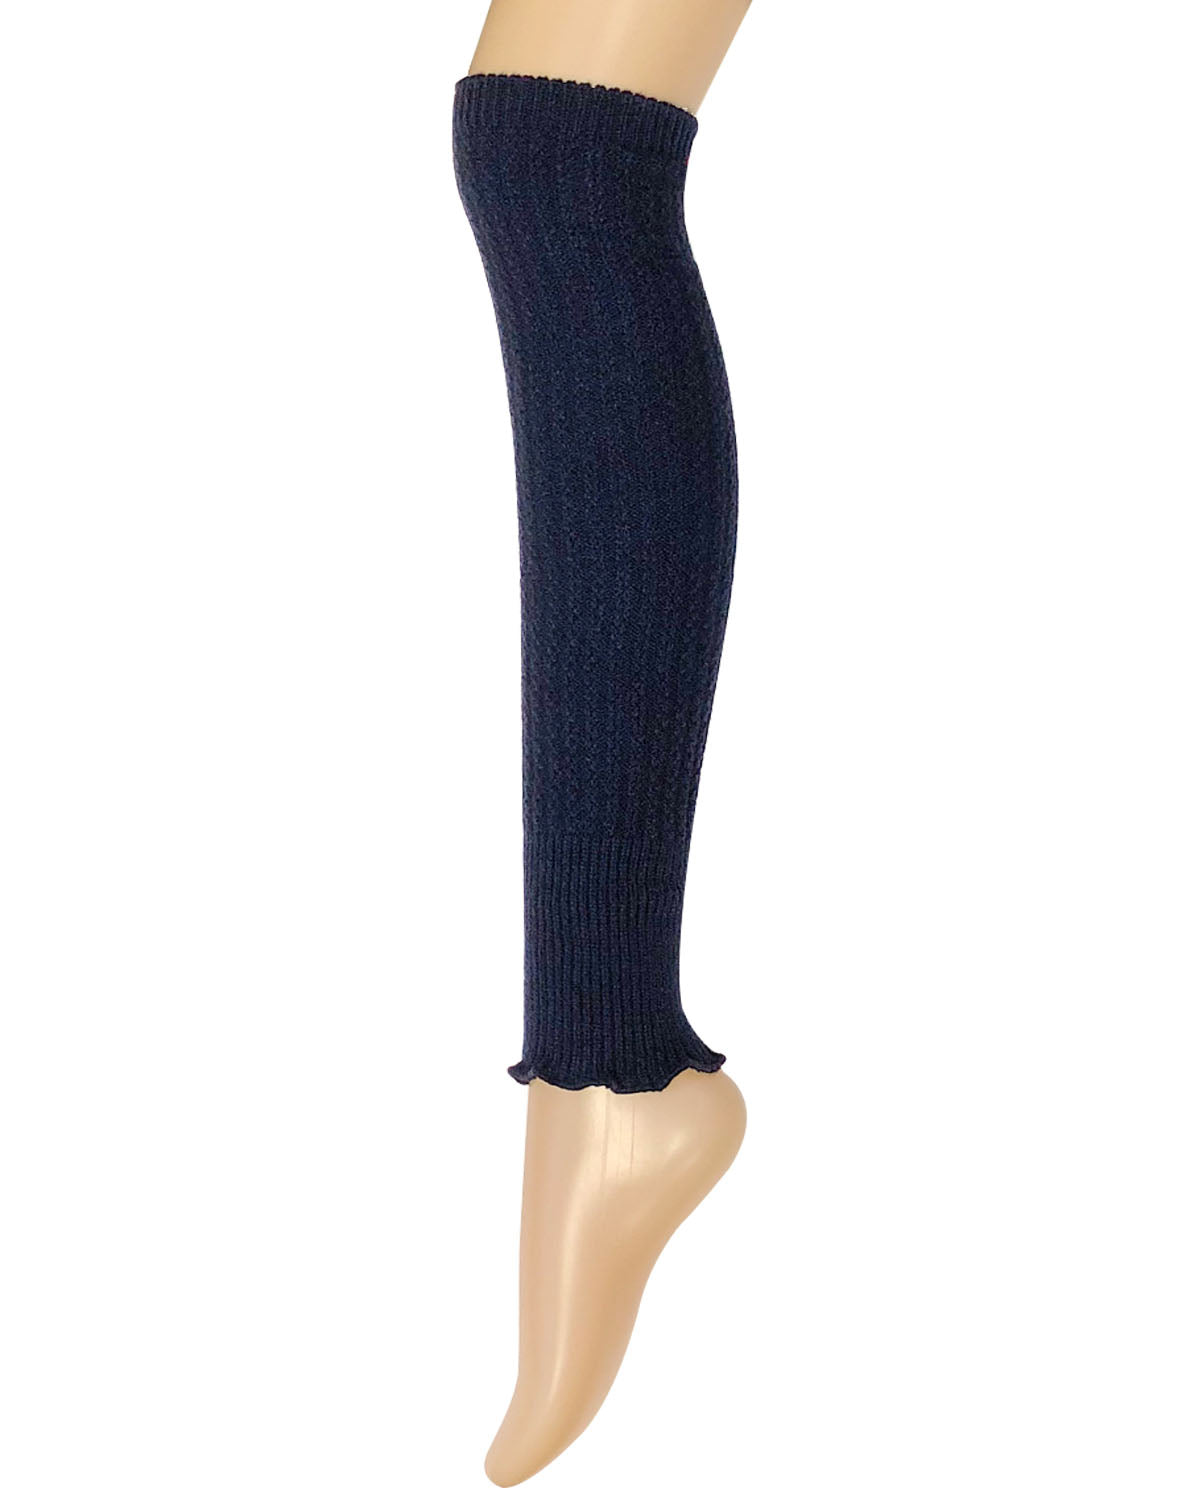 WrapablesÂ® Women's Ribbed Warm Knitted Leg Warmers